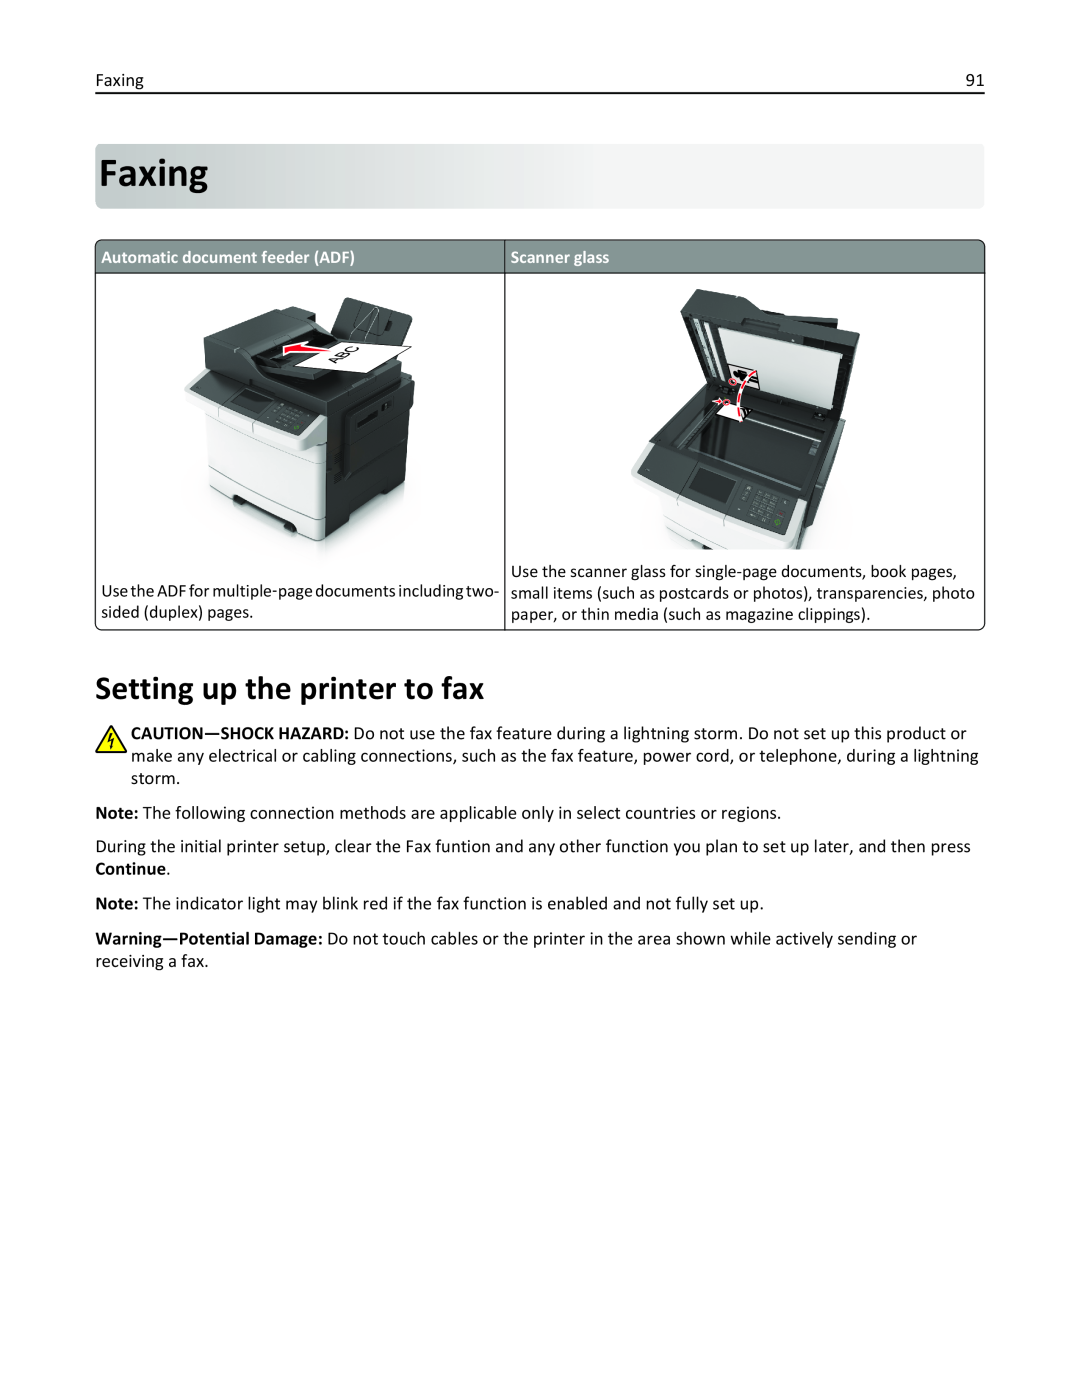 Lexmark 436 manual Faxing, Setting up the printer to fax 